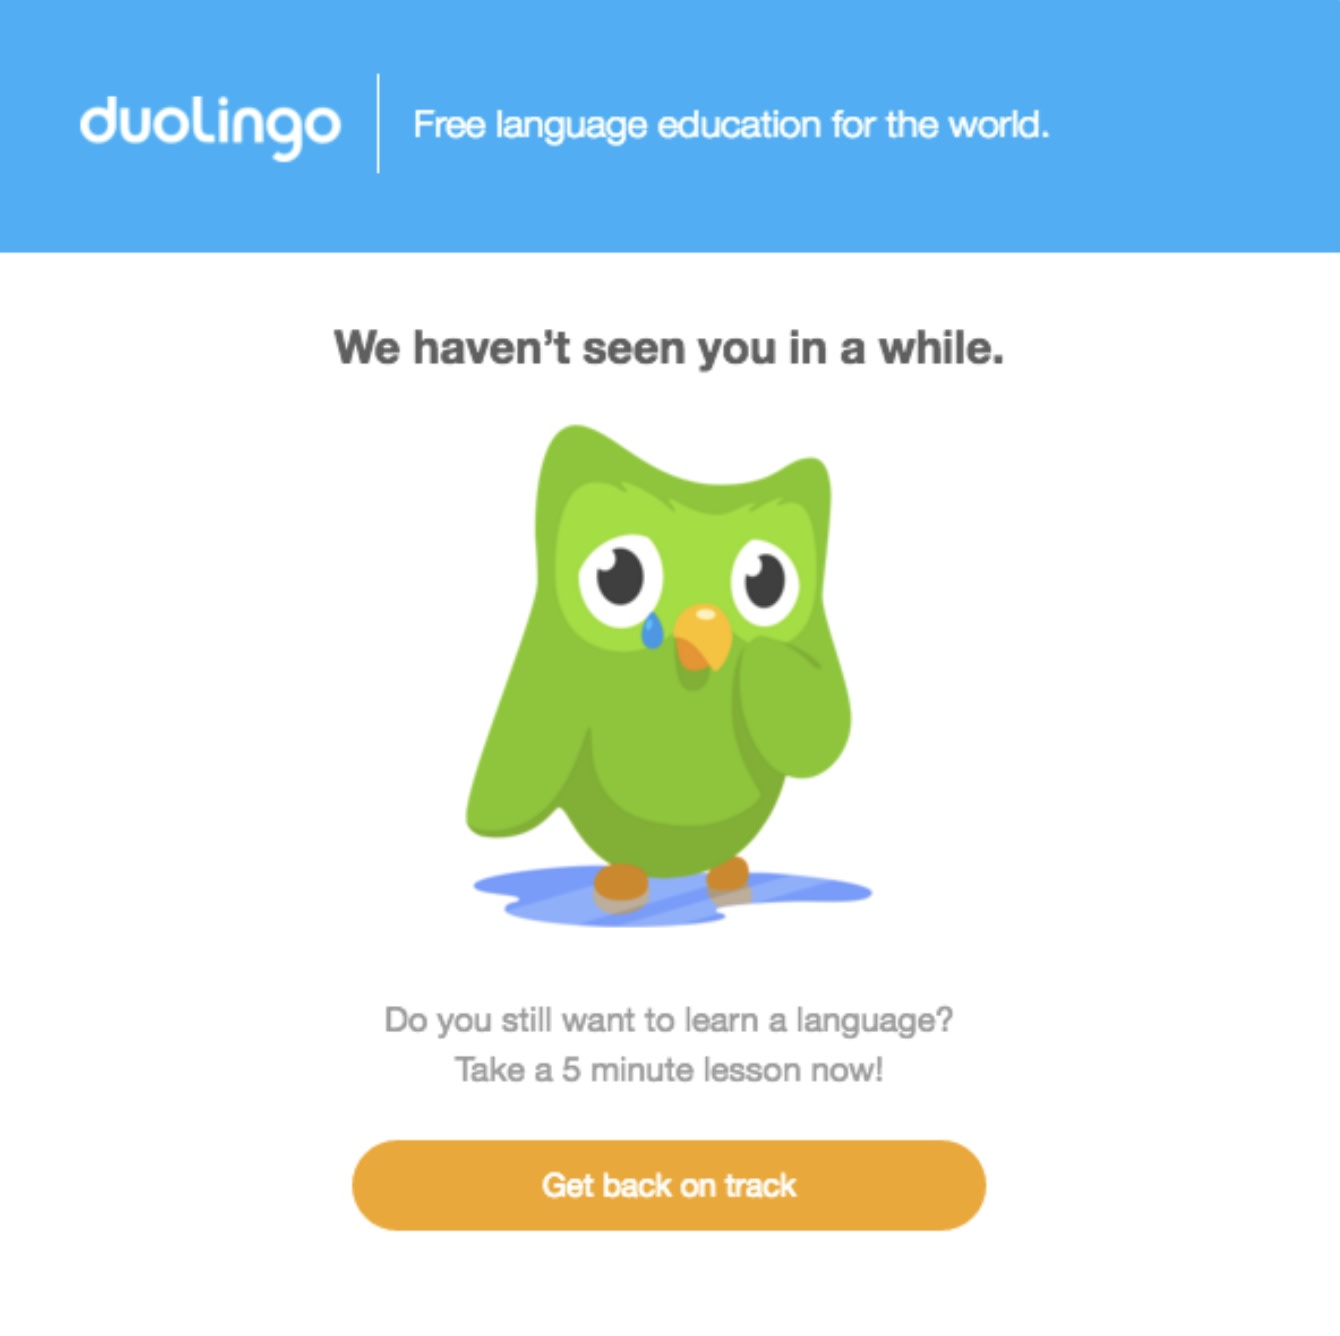 Duolingo email asking the writer to take a 5 minute lesson